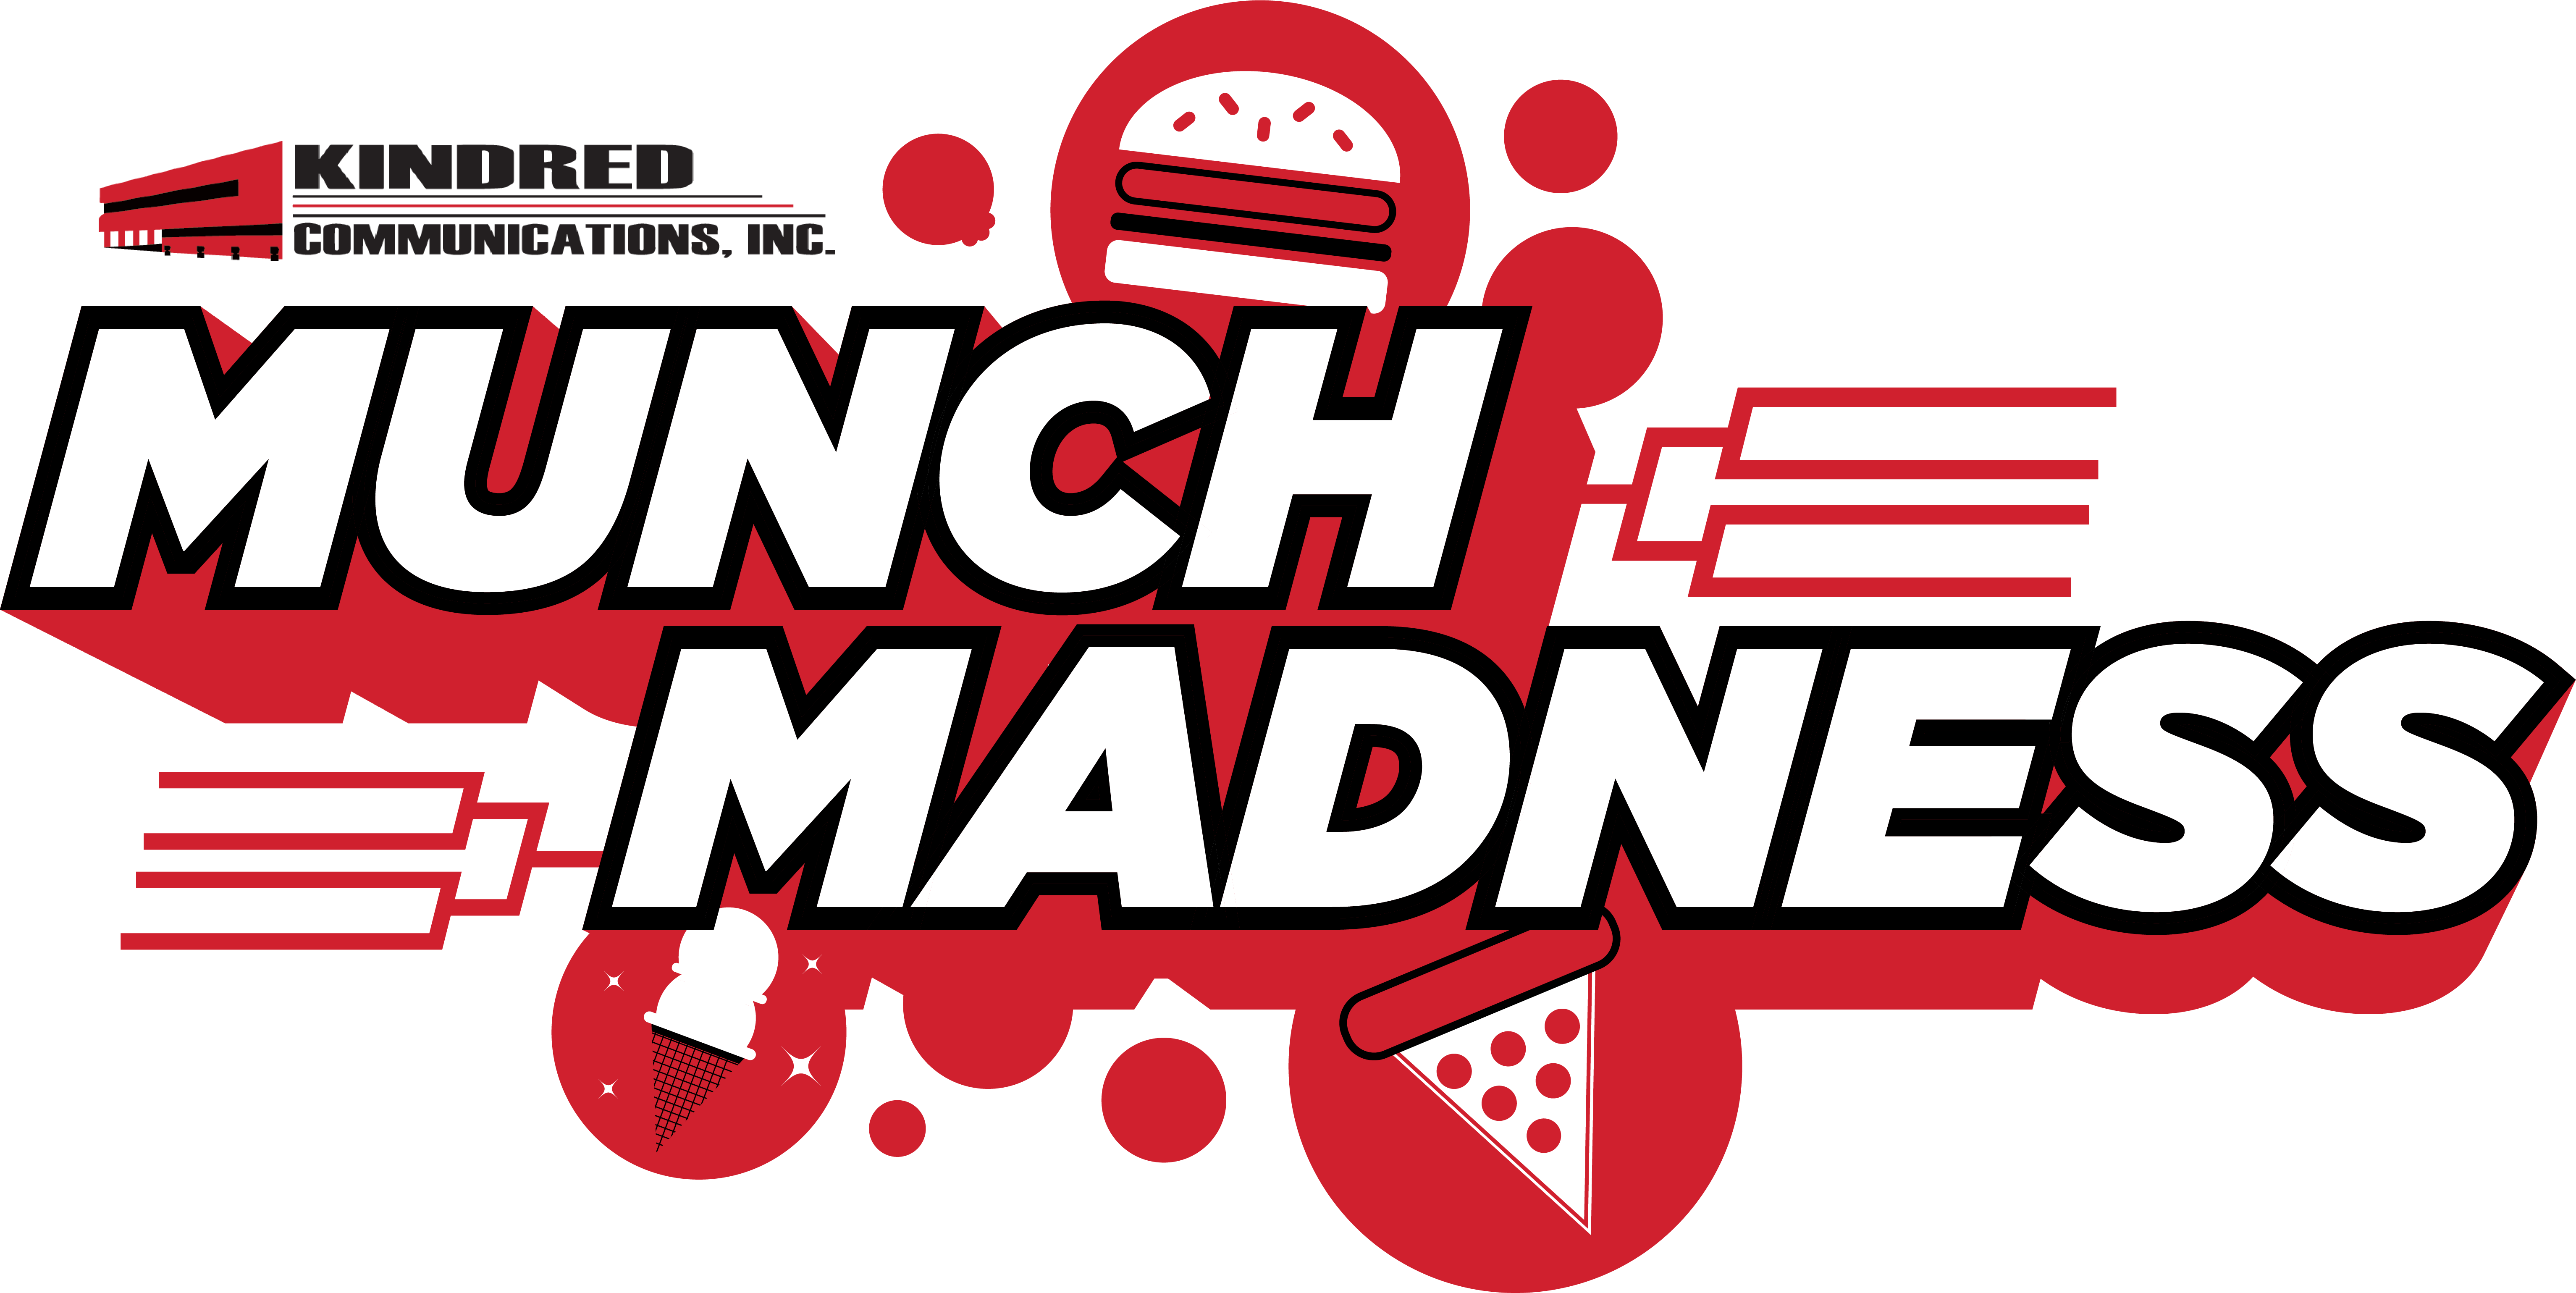 Munch Madness with Kindred Communications